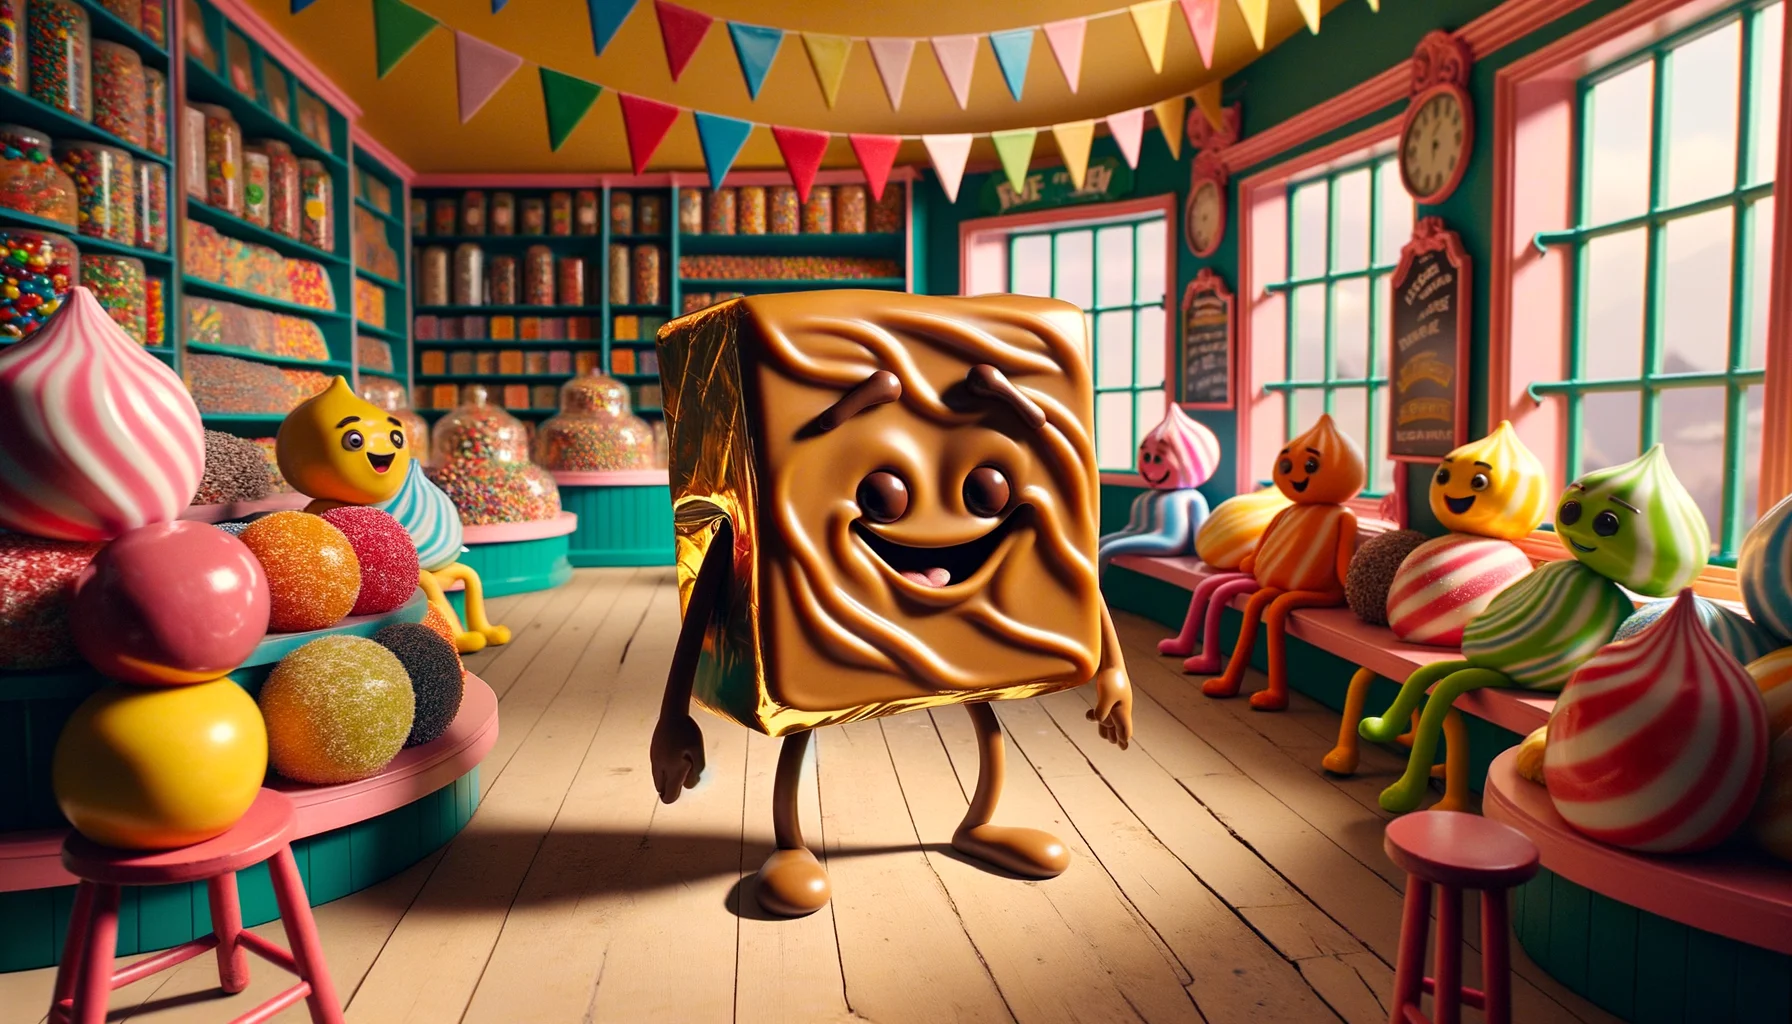 Imagine a delightful and humor-filled scene situated in a charming candy shop. The centerpiece of the image is 'Toffee', envisioned as a character inheriting traits from a bar of toffee candy, with a golden-brown, shiny texture and a whimsical smile. This character is placed in the 'perfect scenario' which is a toffee making competition. Toffee, using its appendages made of soft, bendable toffee, is humorously struggling to wrap itself, but is decidedly cheerful about it - the ultimate irony of a toffee wrapping a toffee. The surroundings are filled with vibrant candy colors and chuckling customers of all age groups watching the fun unfold.